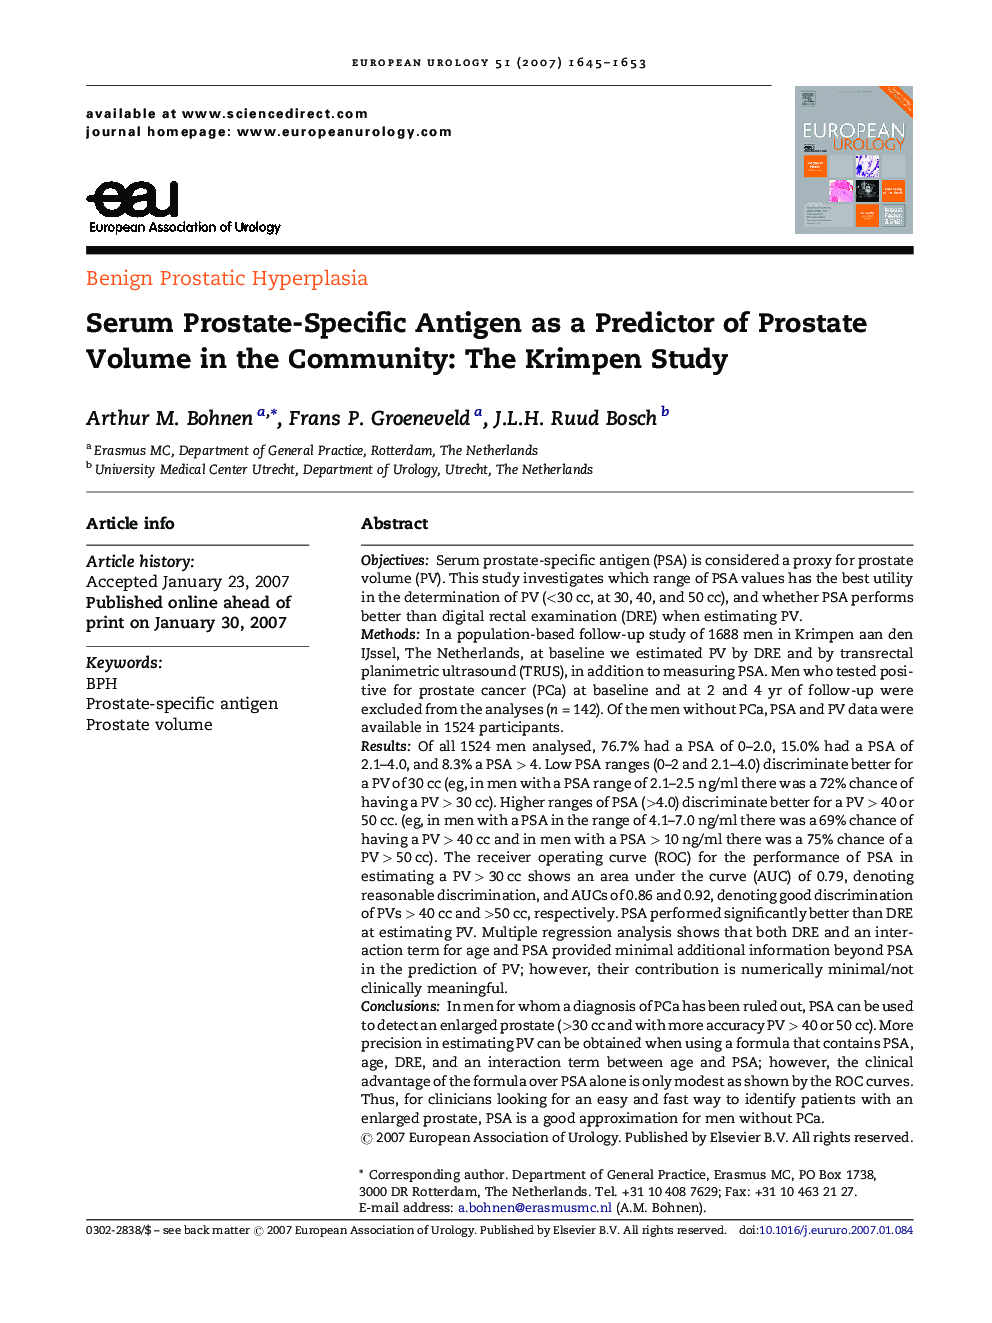 Serum Prostate-Specific Antigen as a Predictor of Prostate Volume in the Community: The Krimpen Study